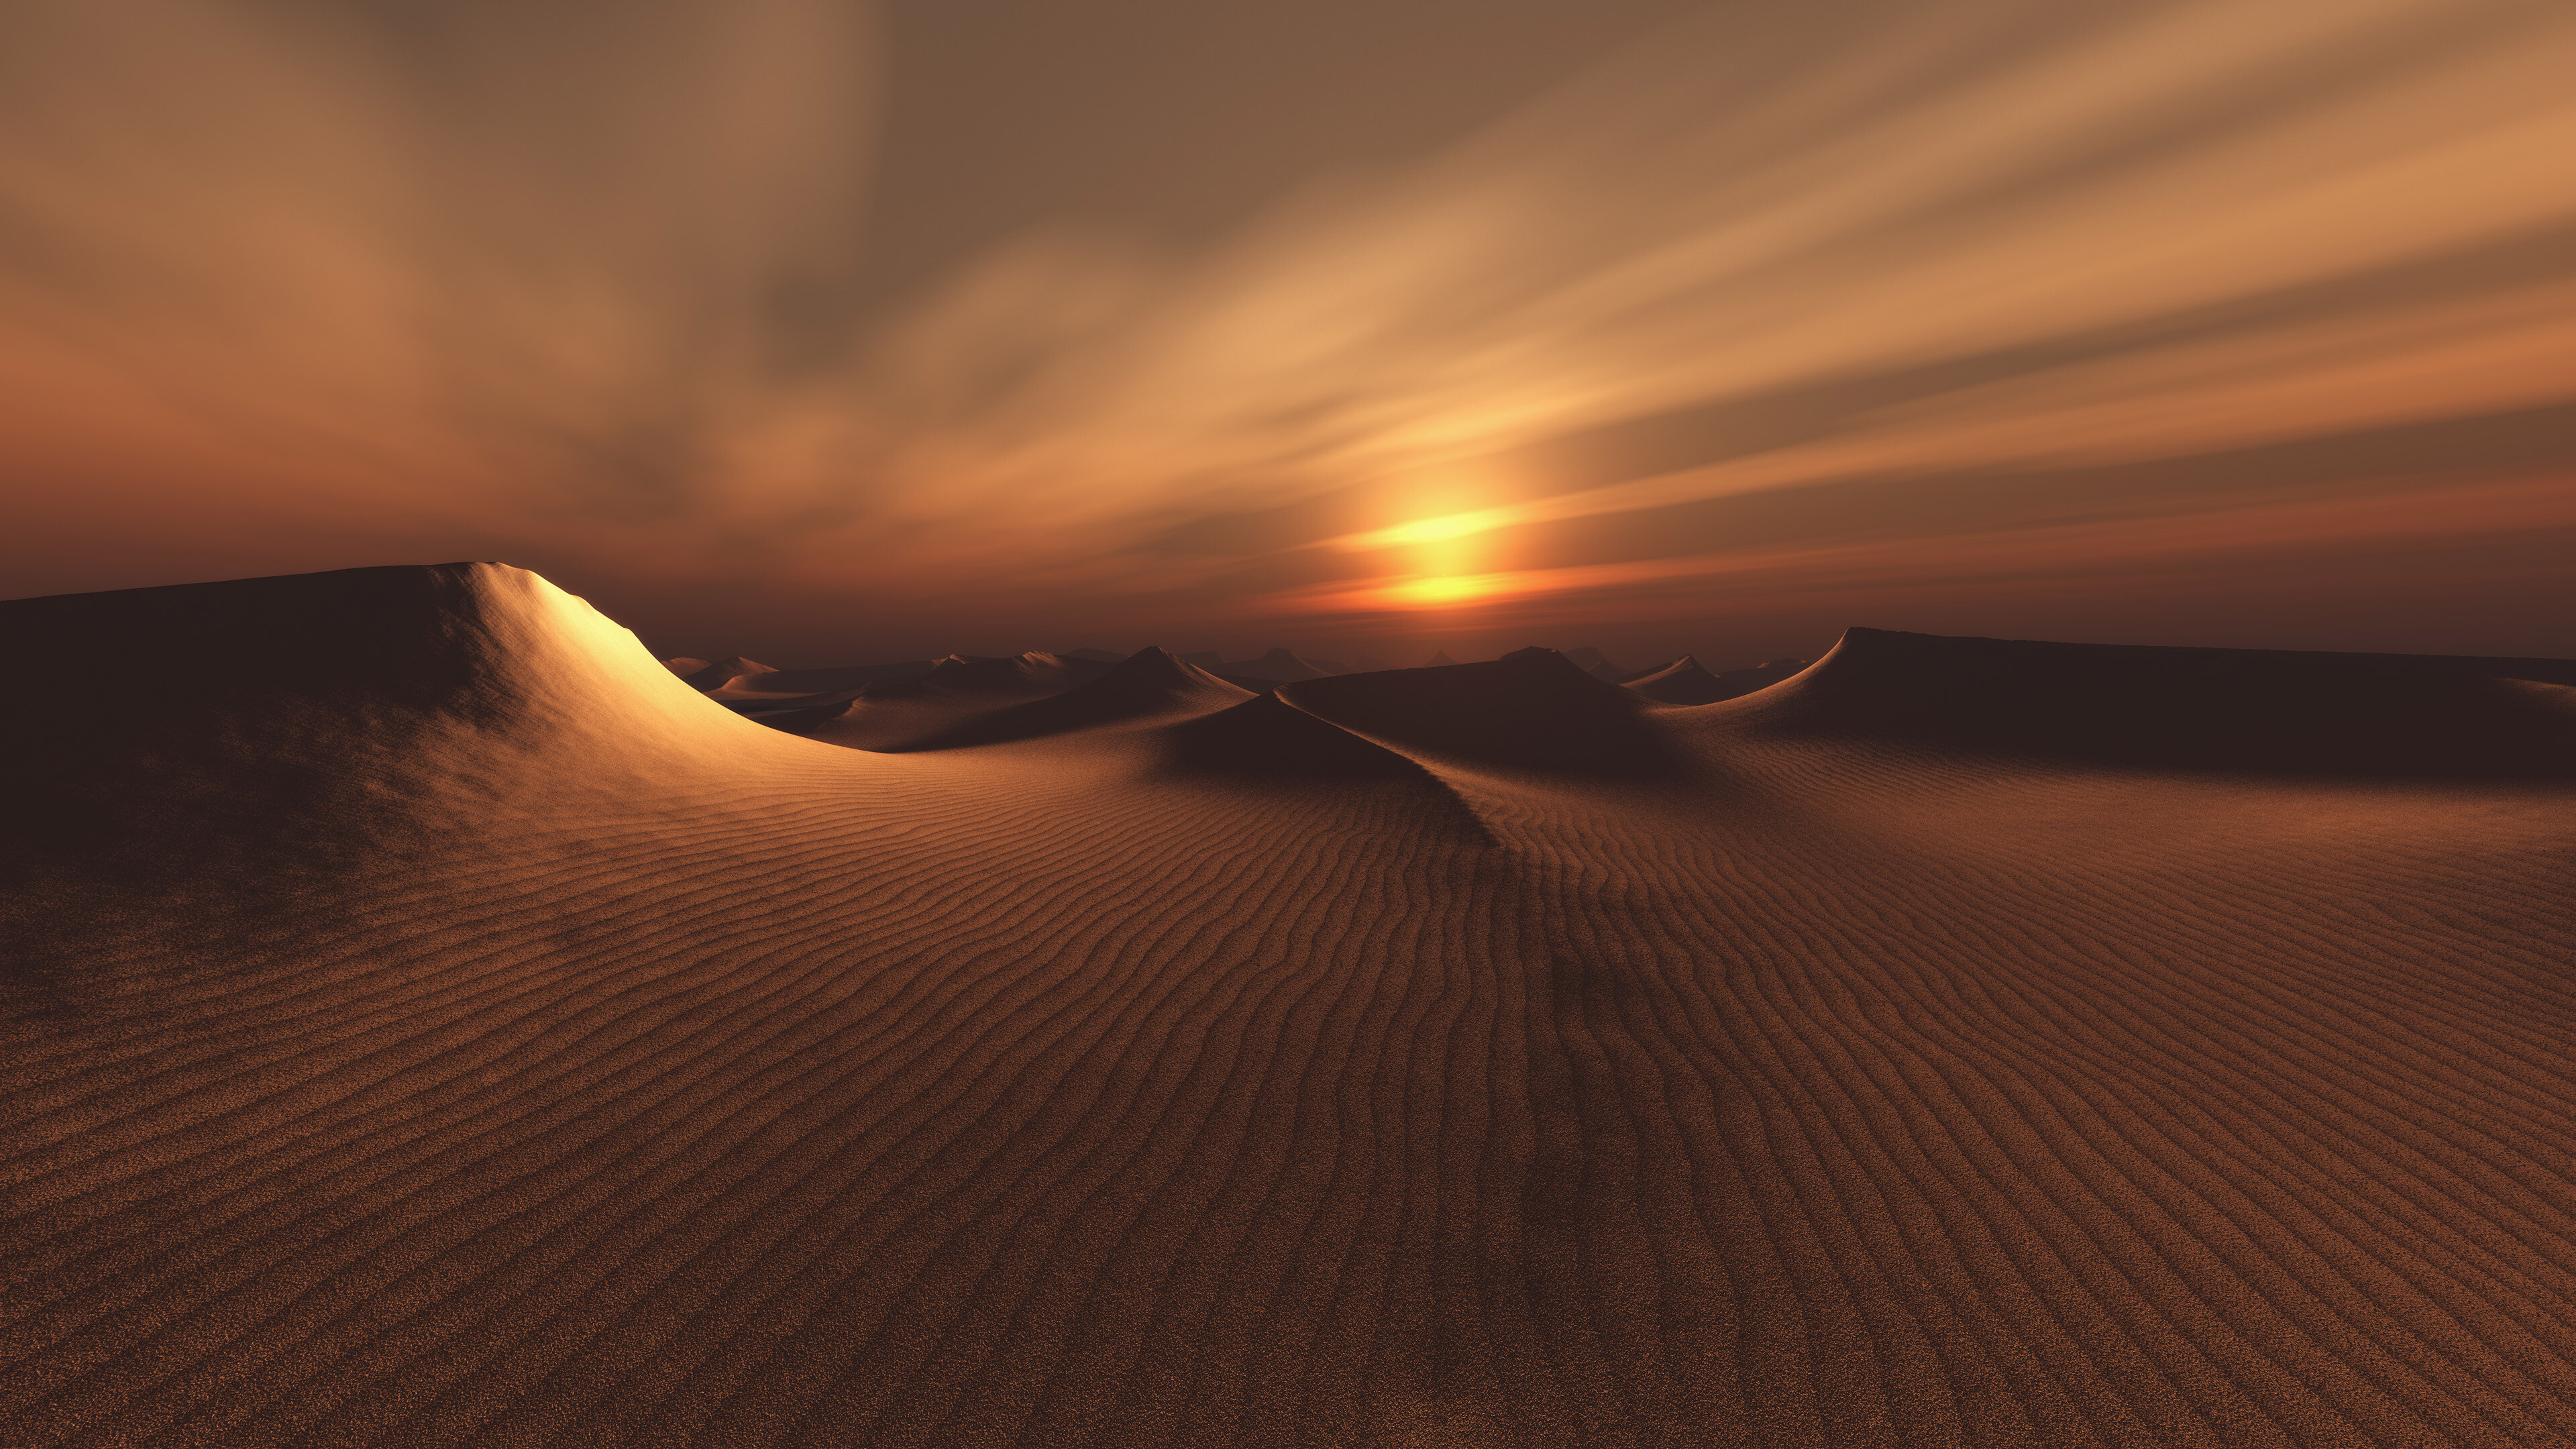 Desert: Wind-blown sand grains striking any solid object in their path can abrade the surface. 3840x2160 4K Wallpaper.